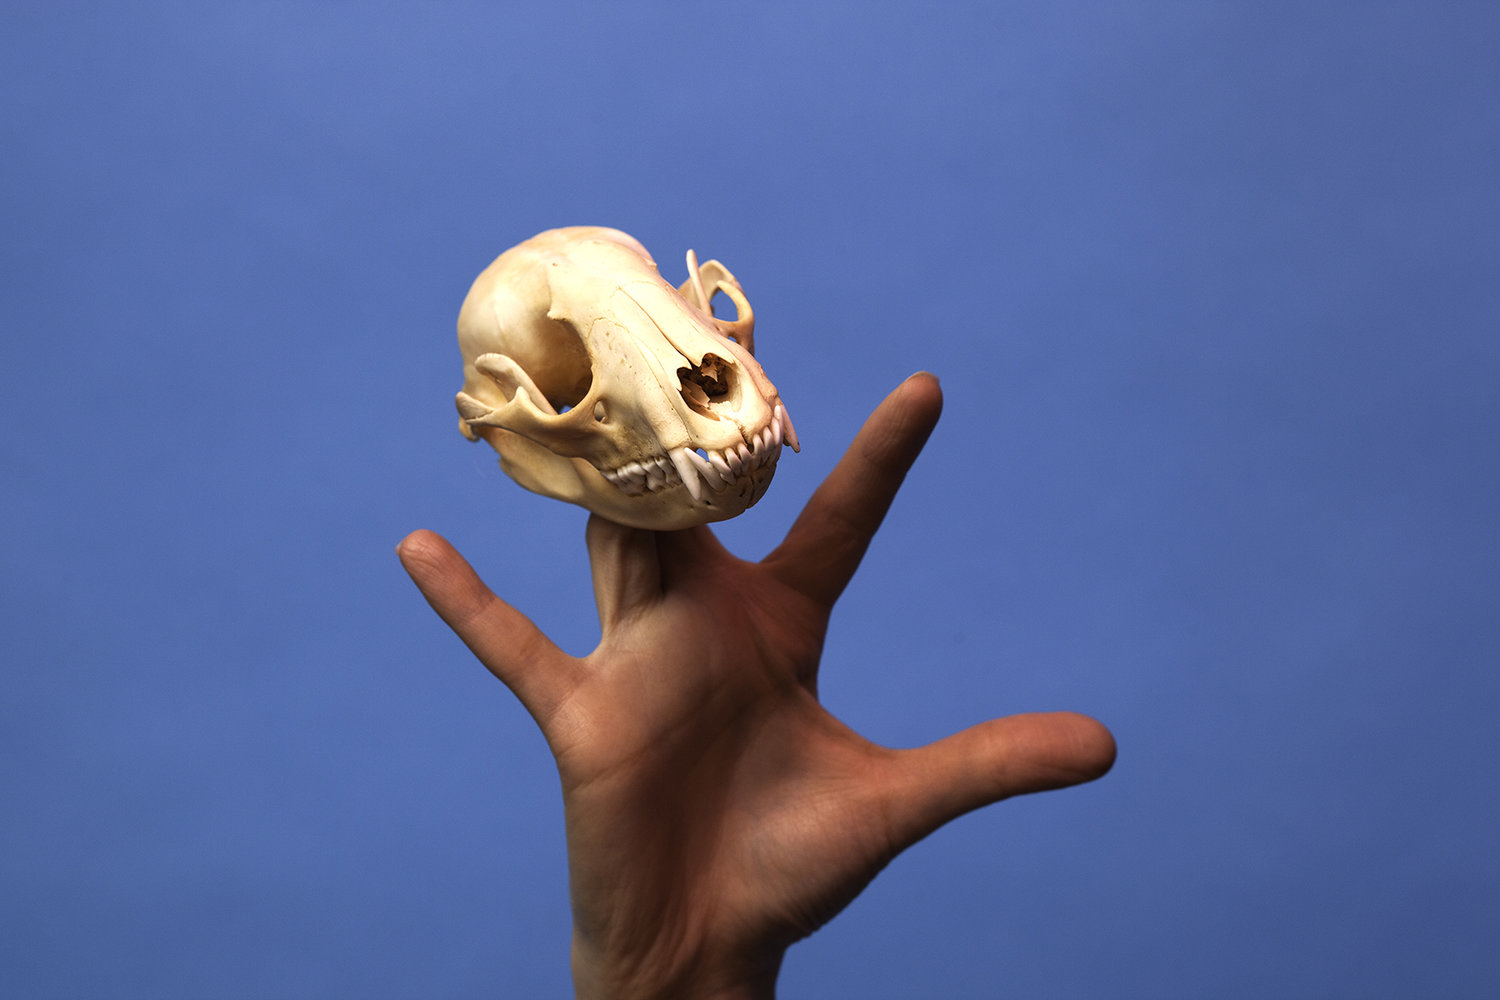 A hand holding an animal skull in front of a bright blue back drop shot by photographer Nicholas Rouke